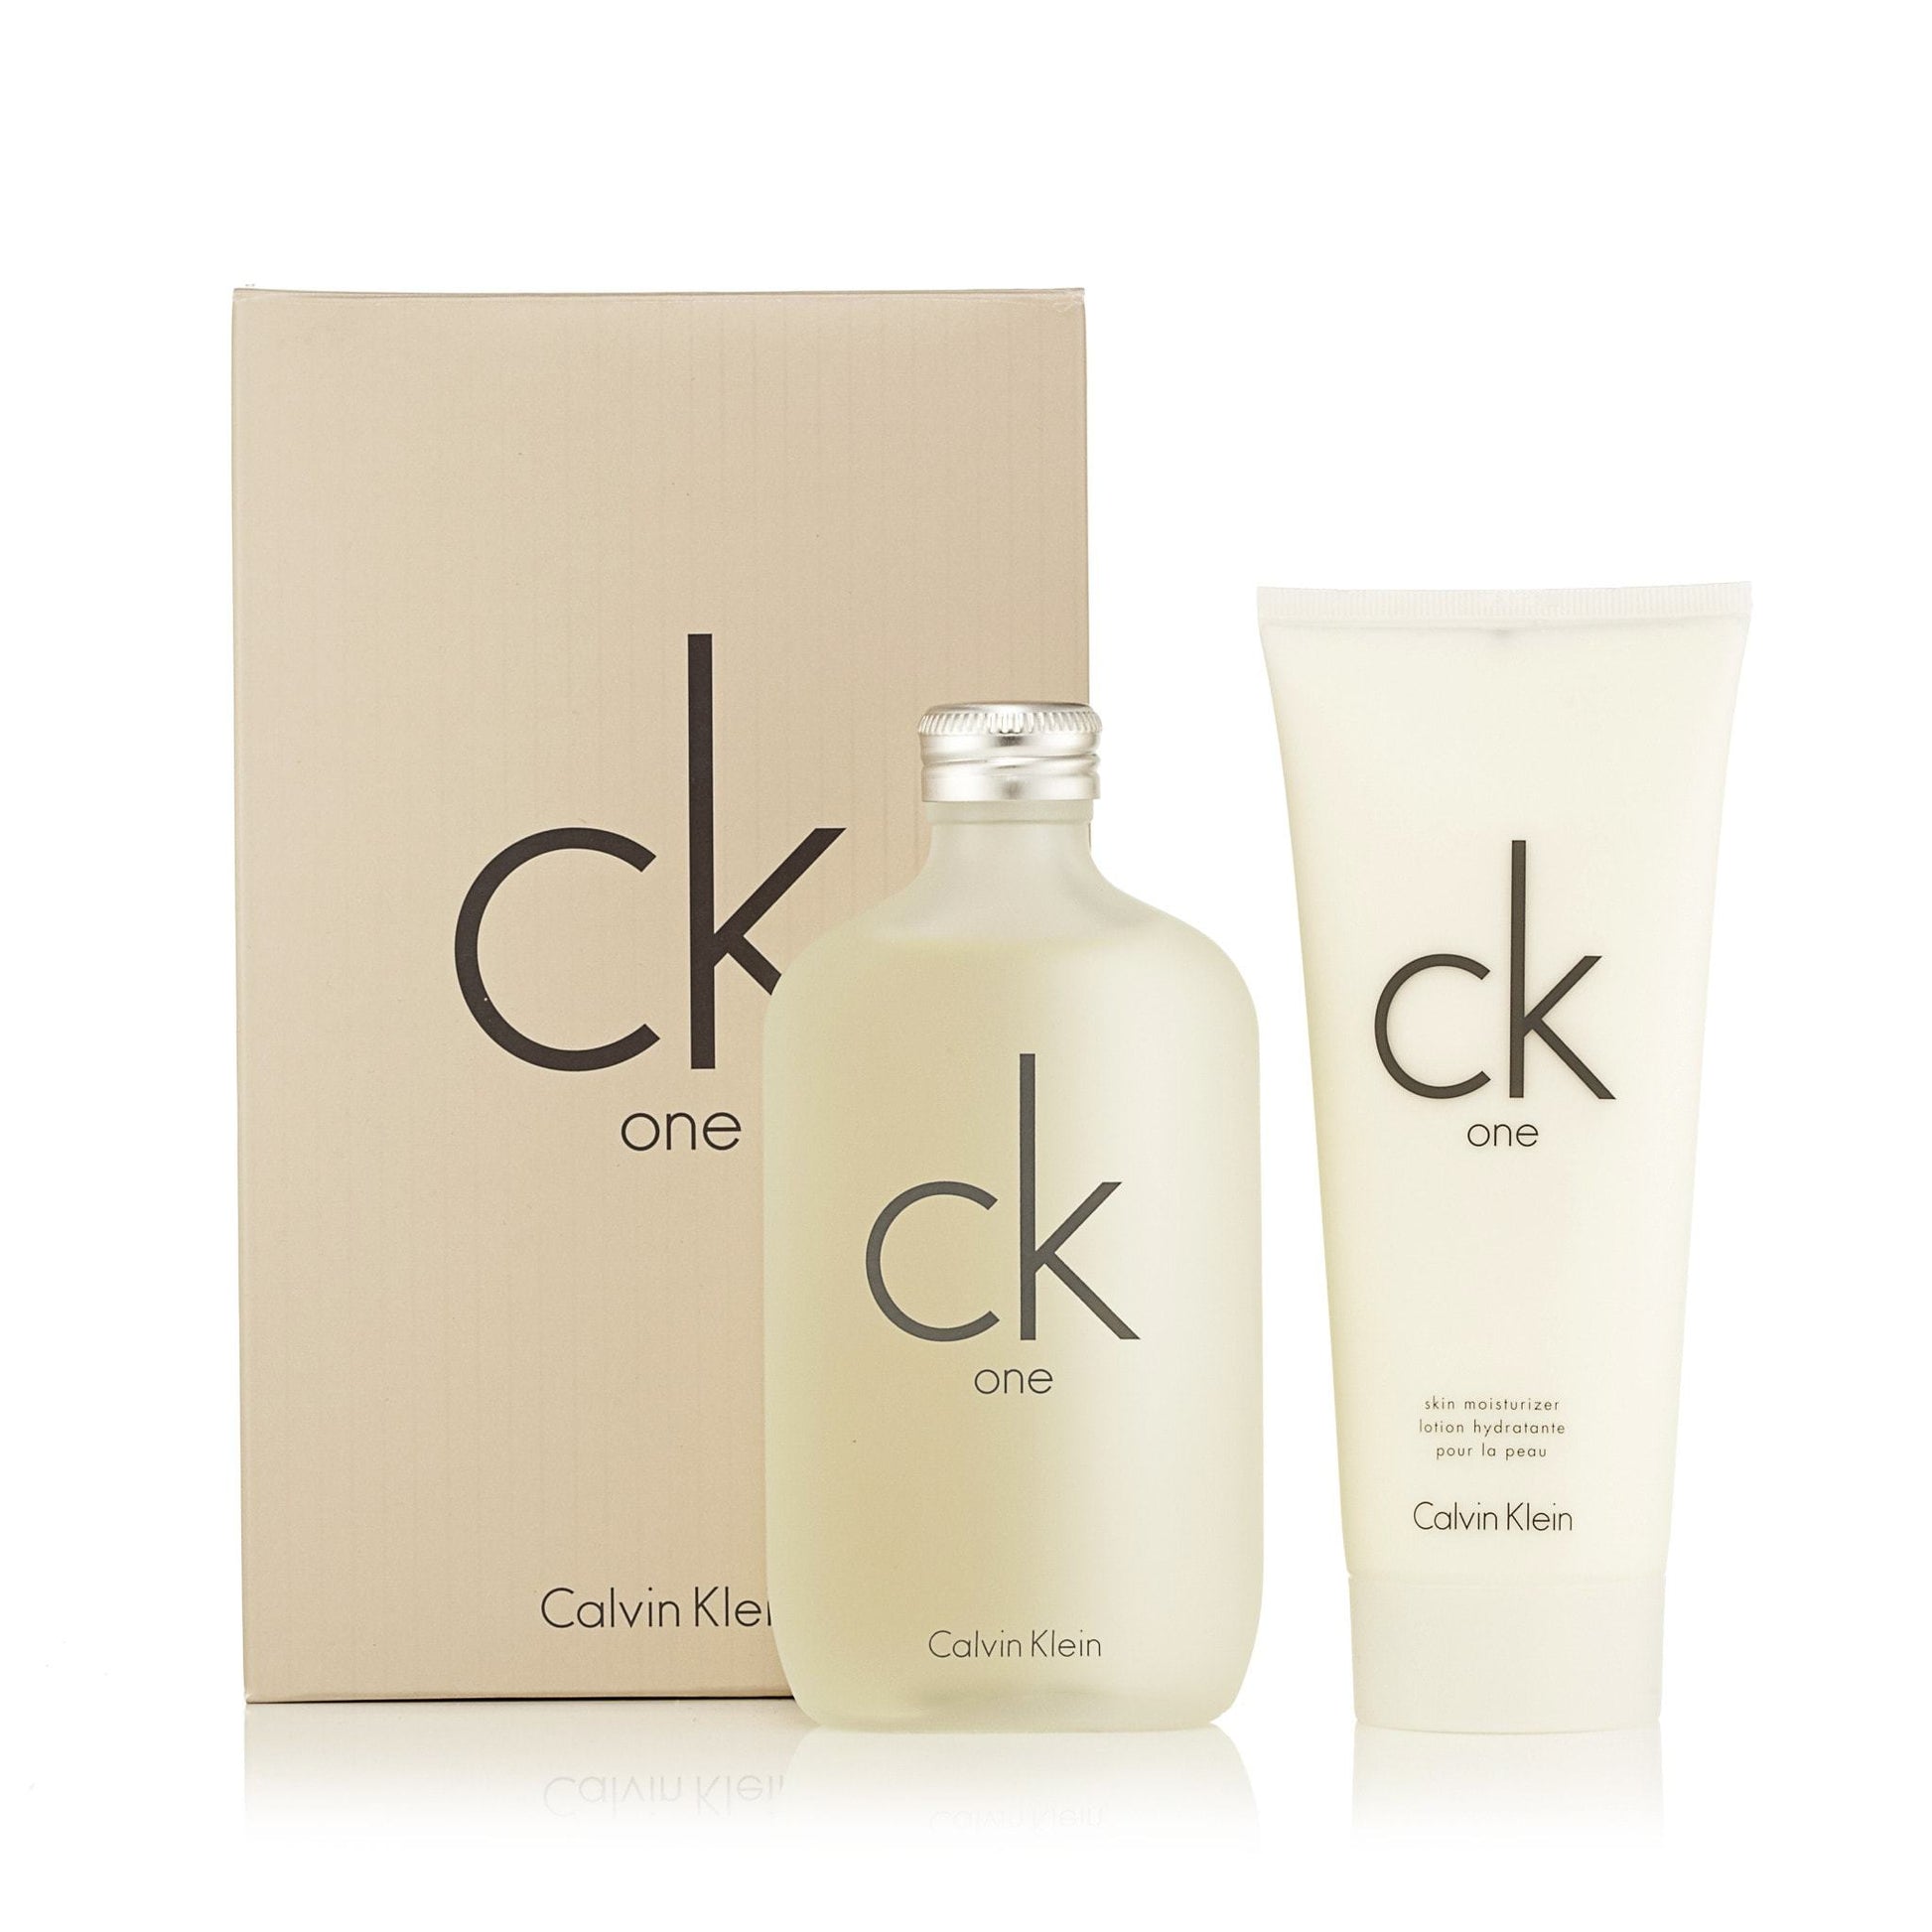 Outlet for EDT CK Fragrance One Set and Calvin Moisturizer by Women Skin K Gift – Men and